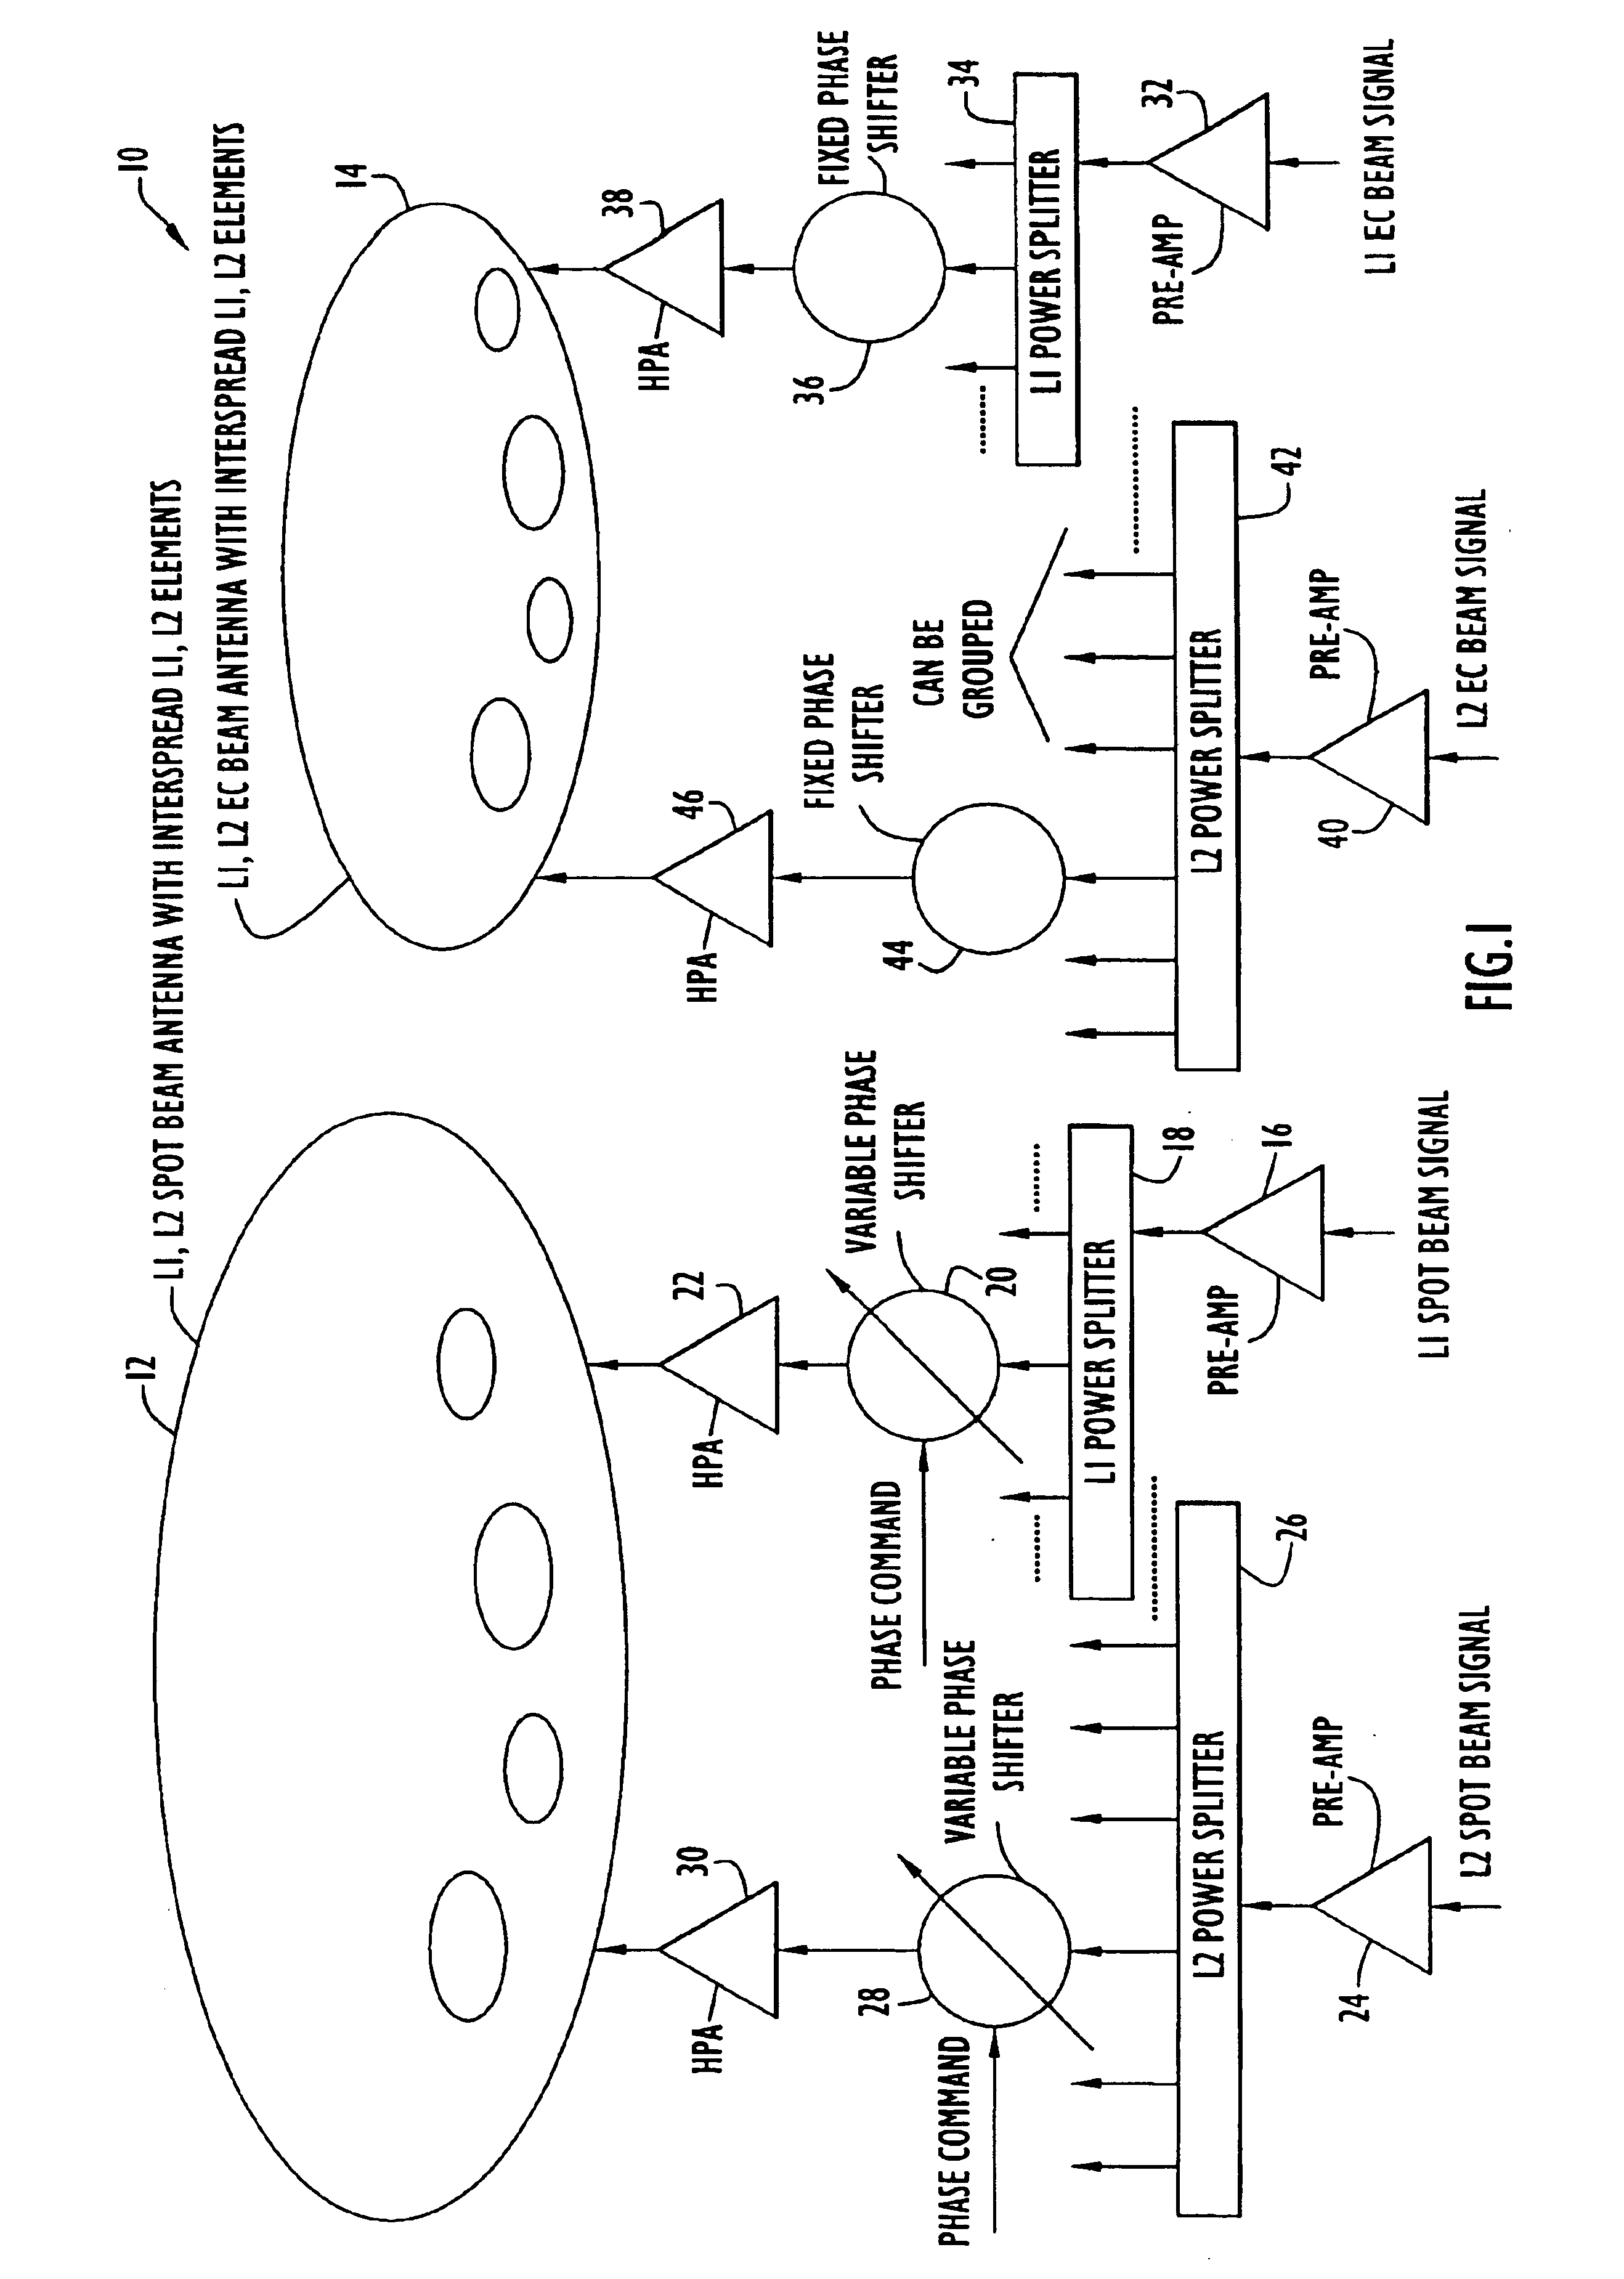 Methods and apparatus for multi-beam, multi-signal transmission for active phased array antenna